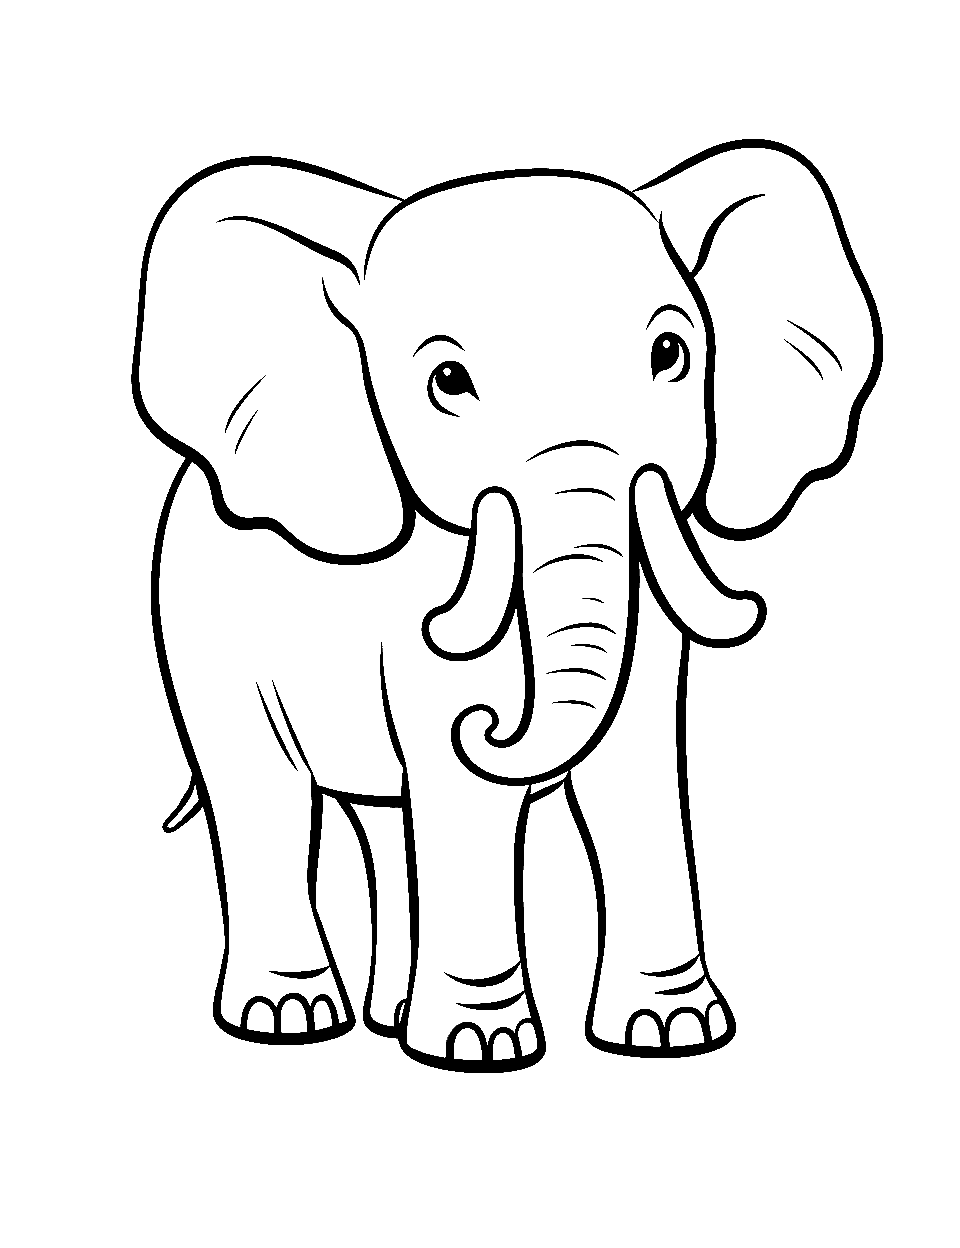 Easy Outline for Little Hands Coloring Page - A simple elephant outline, perfect for preschoolers.